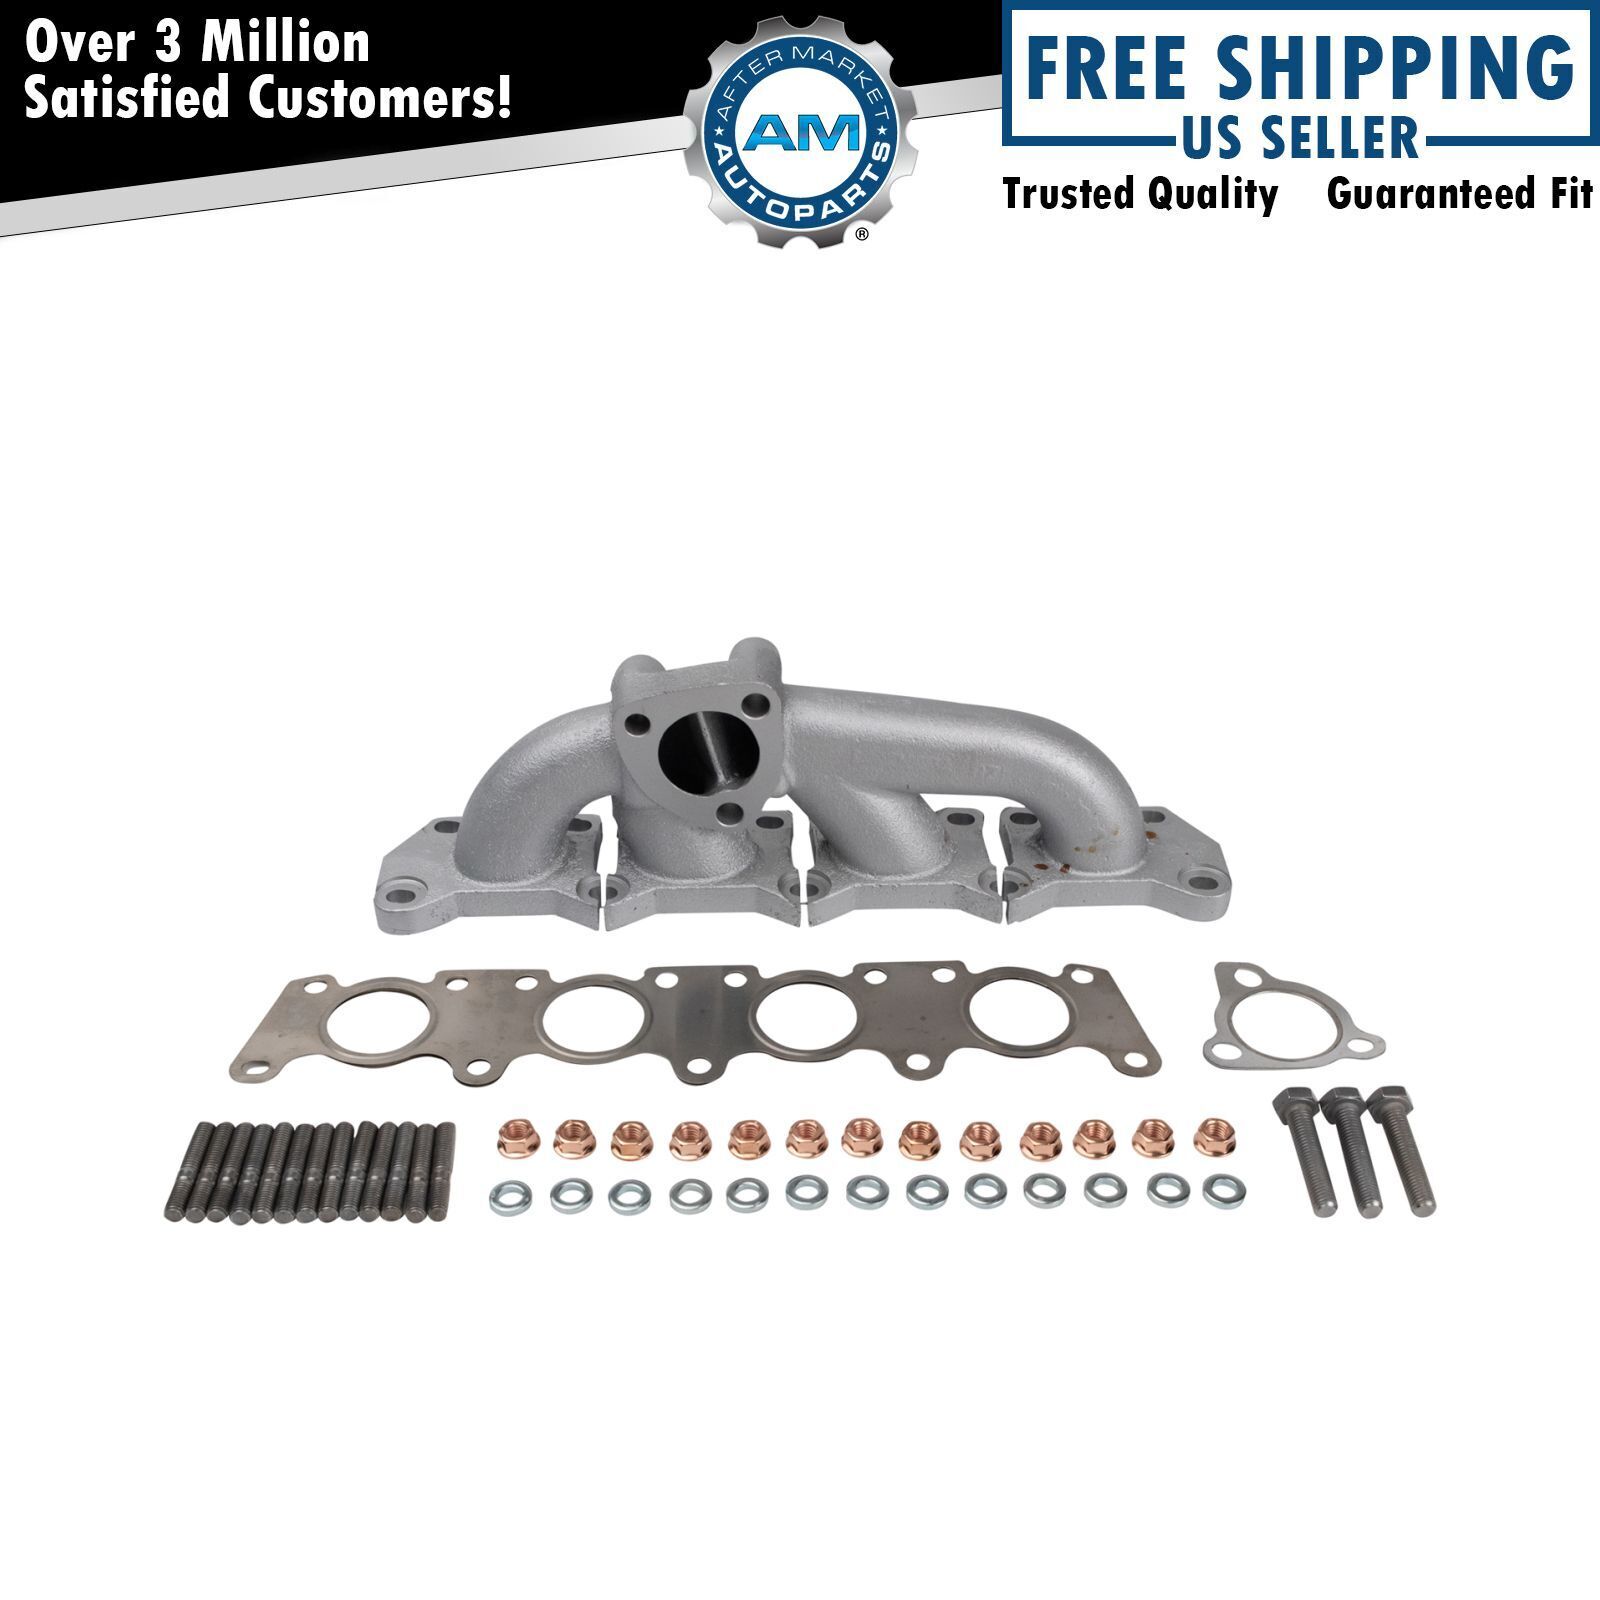 Engine Exhaust Manifold with Gaskets for Audi TT VW Golf Beetle Jetta